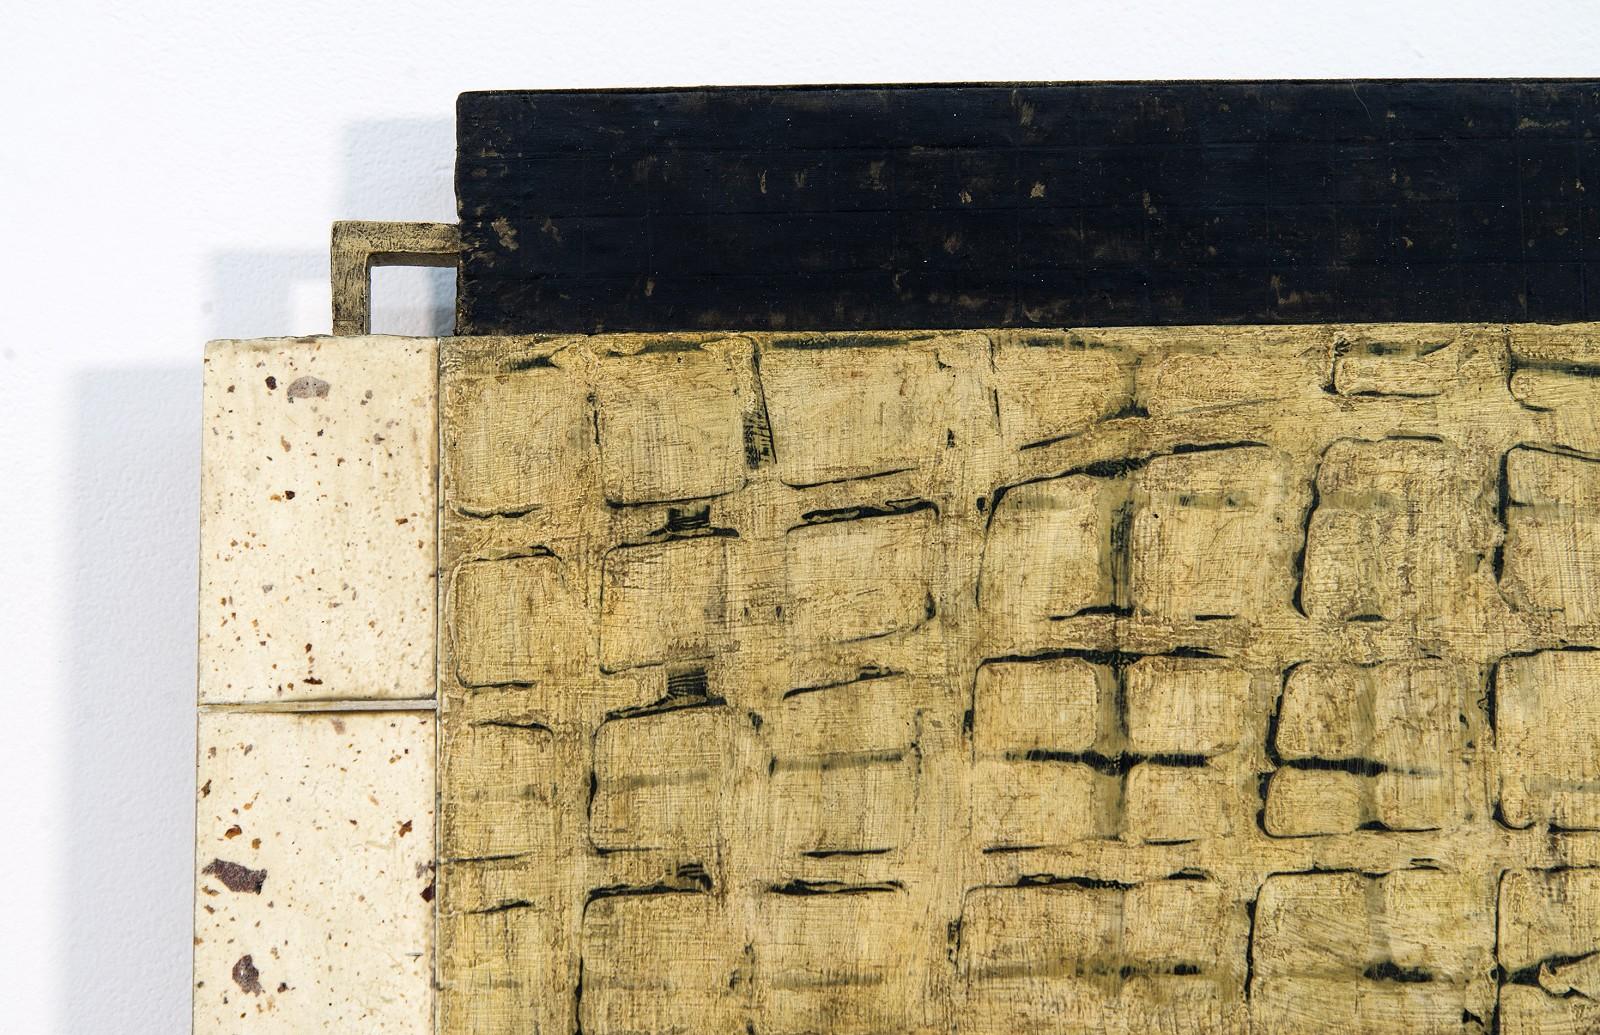 Textured wood sections in light brown, gold and black intersect in this wall relief.

Lucy Maki has been a professional painter for over 25 years. She was born in Ames, Iowa in 1955 and received her MA and MFA from the University of New Mexico,